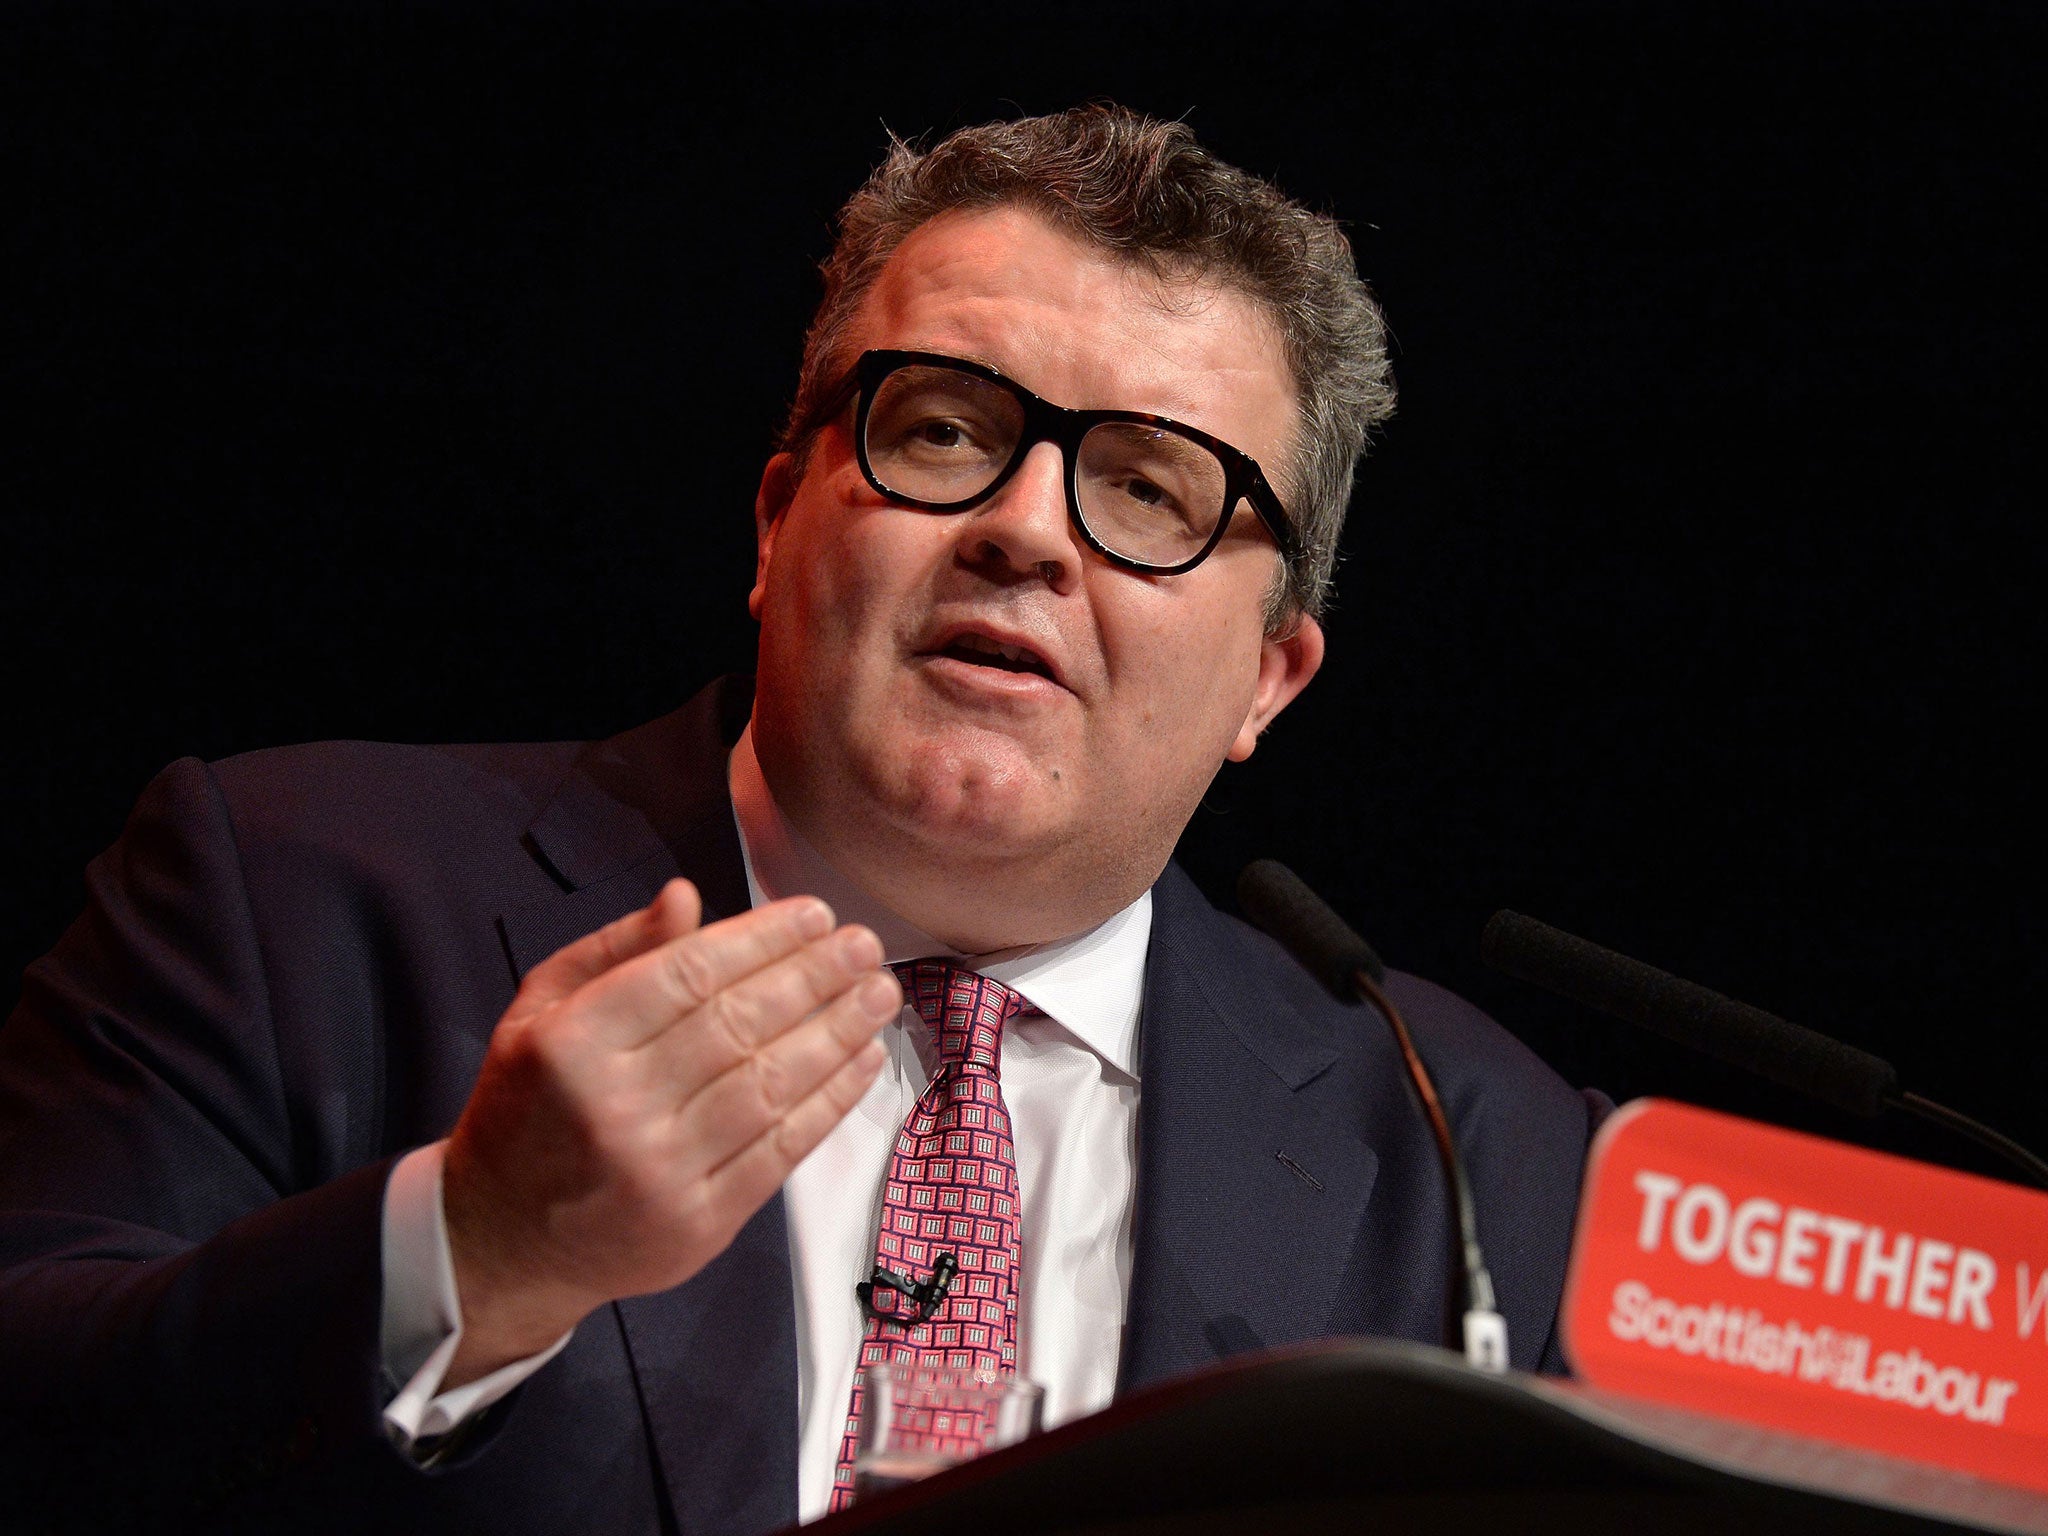 Deputy Labour leader Tom Watson says the party will consider a levy on bookmakers to curb problem gambling